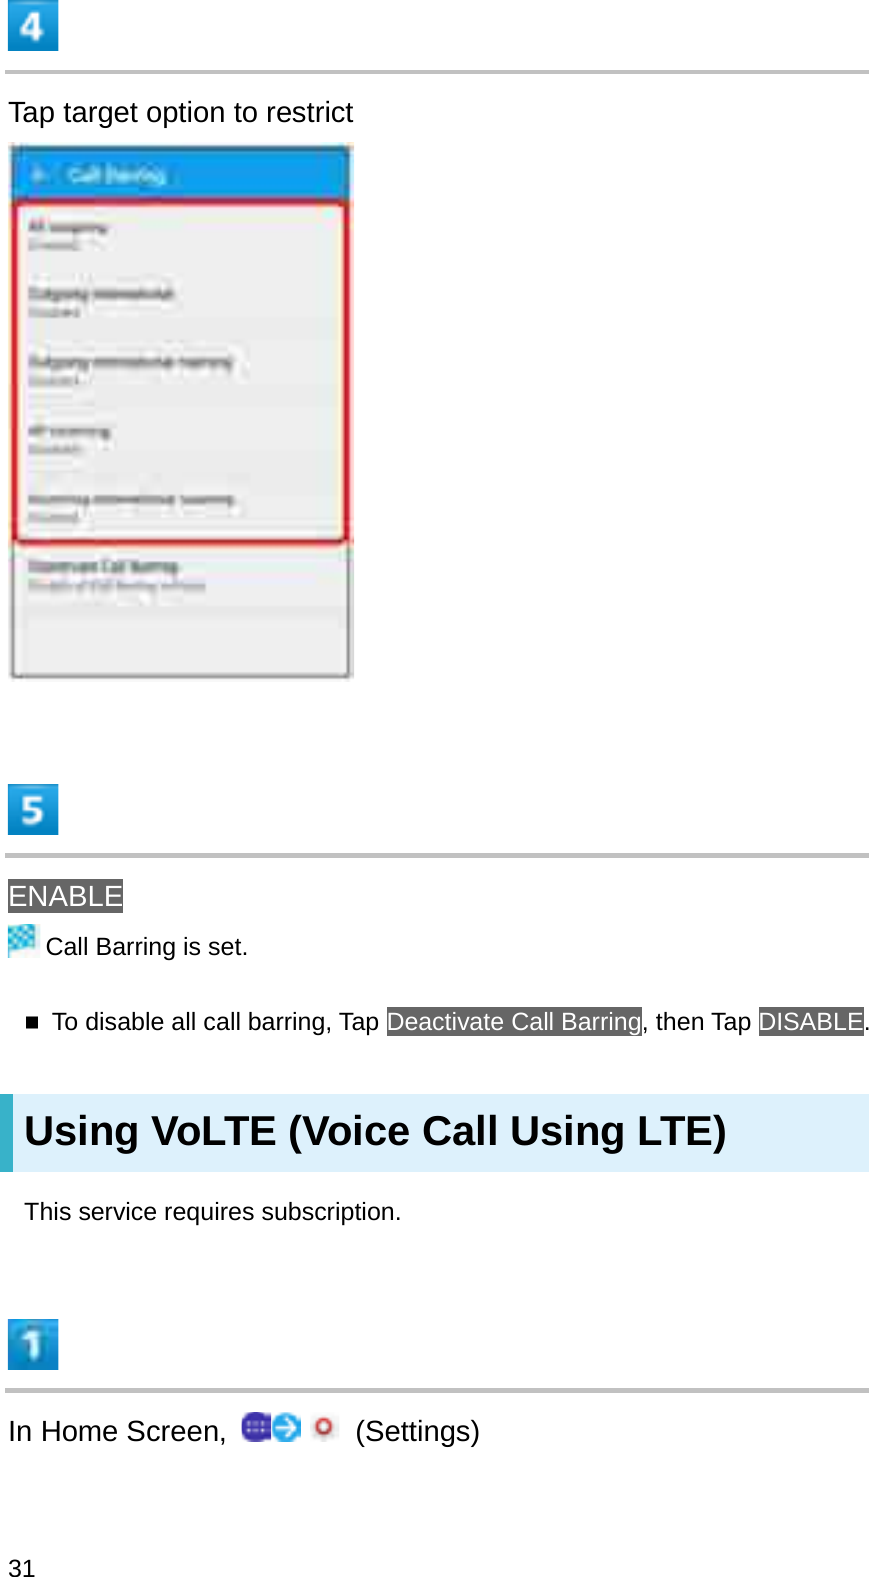 Tap target option to restrictENABLECall Barring is set.To disable all call barring, Tap Deactivate Call Barring, then Tap DISABLE.Using VoLTE (Voice Call Using LTE)This service requires subscription.In Home Screen,  (Settings)31